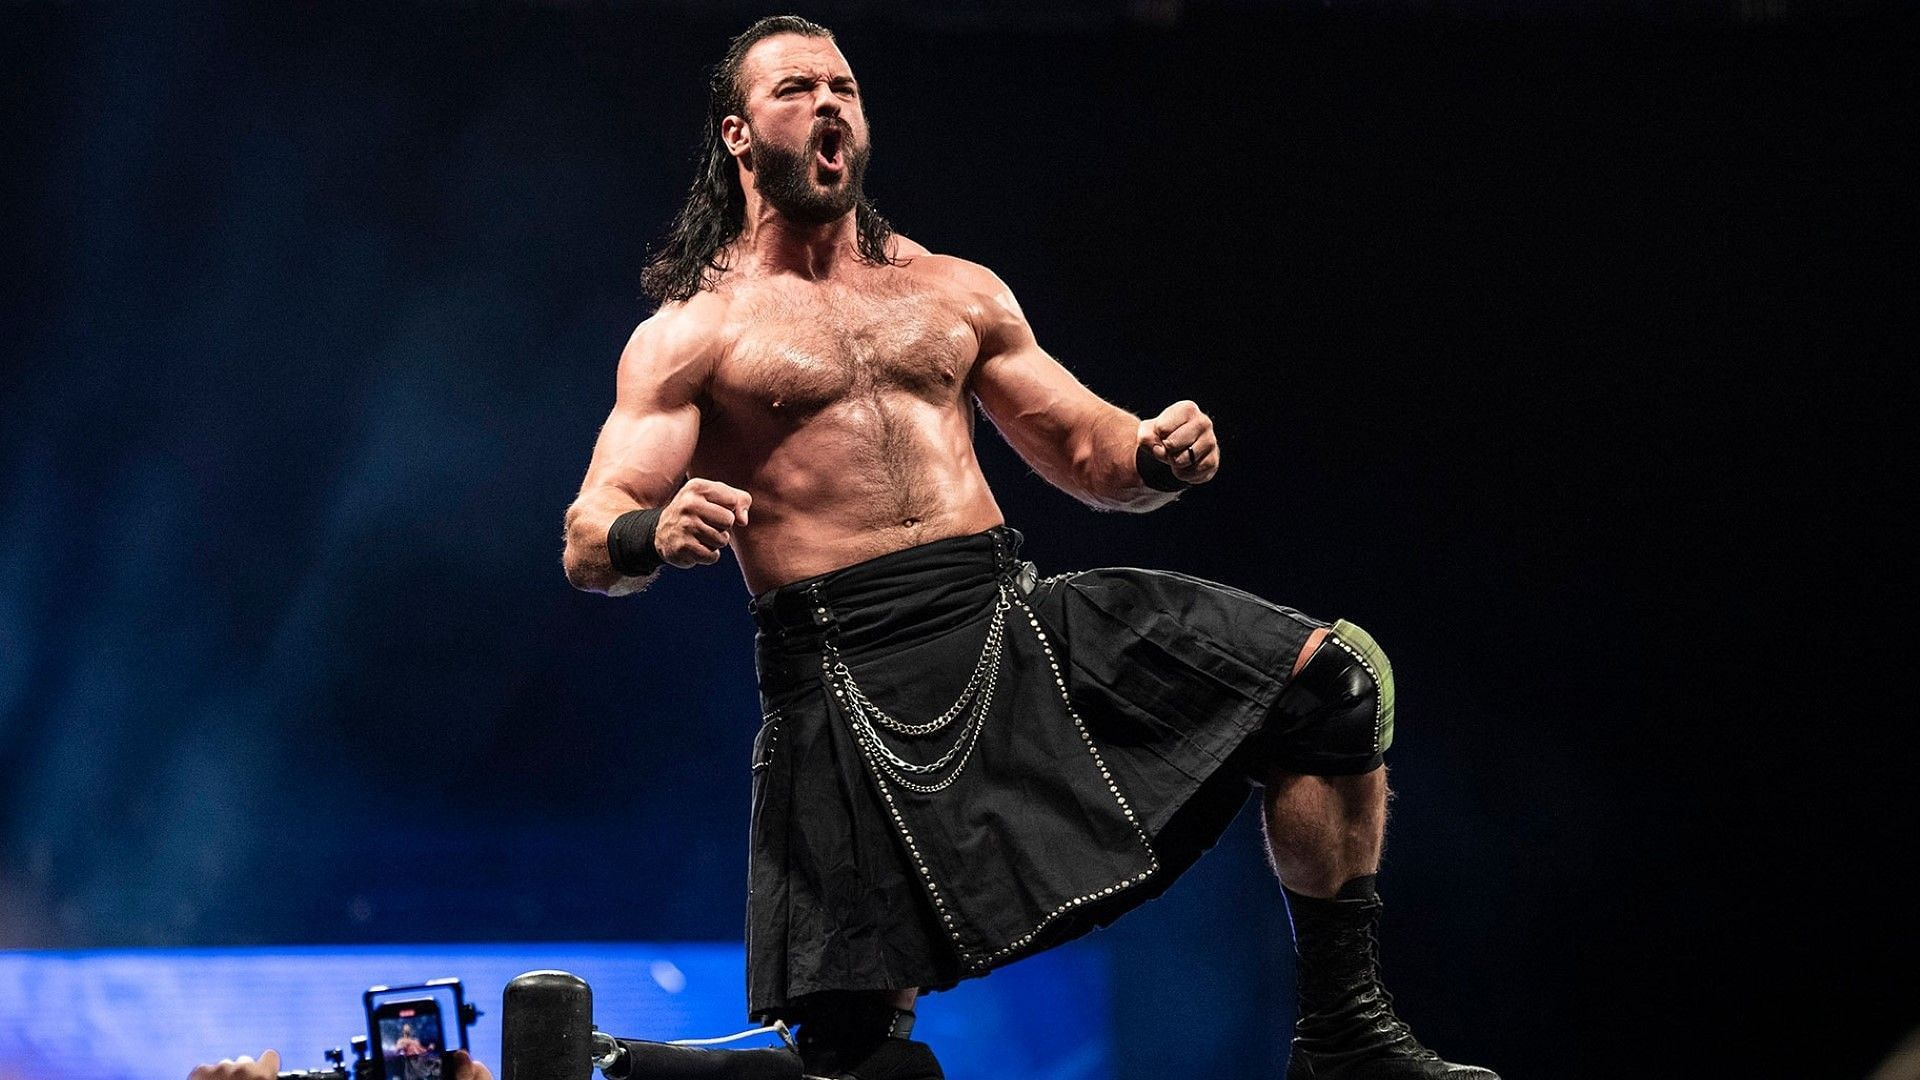 Drew McIntyre poses in the ring on WWE RAW